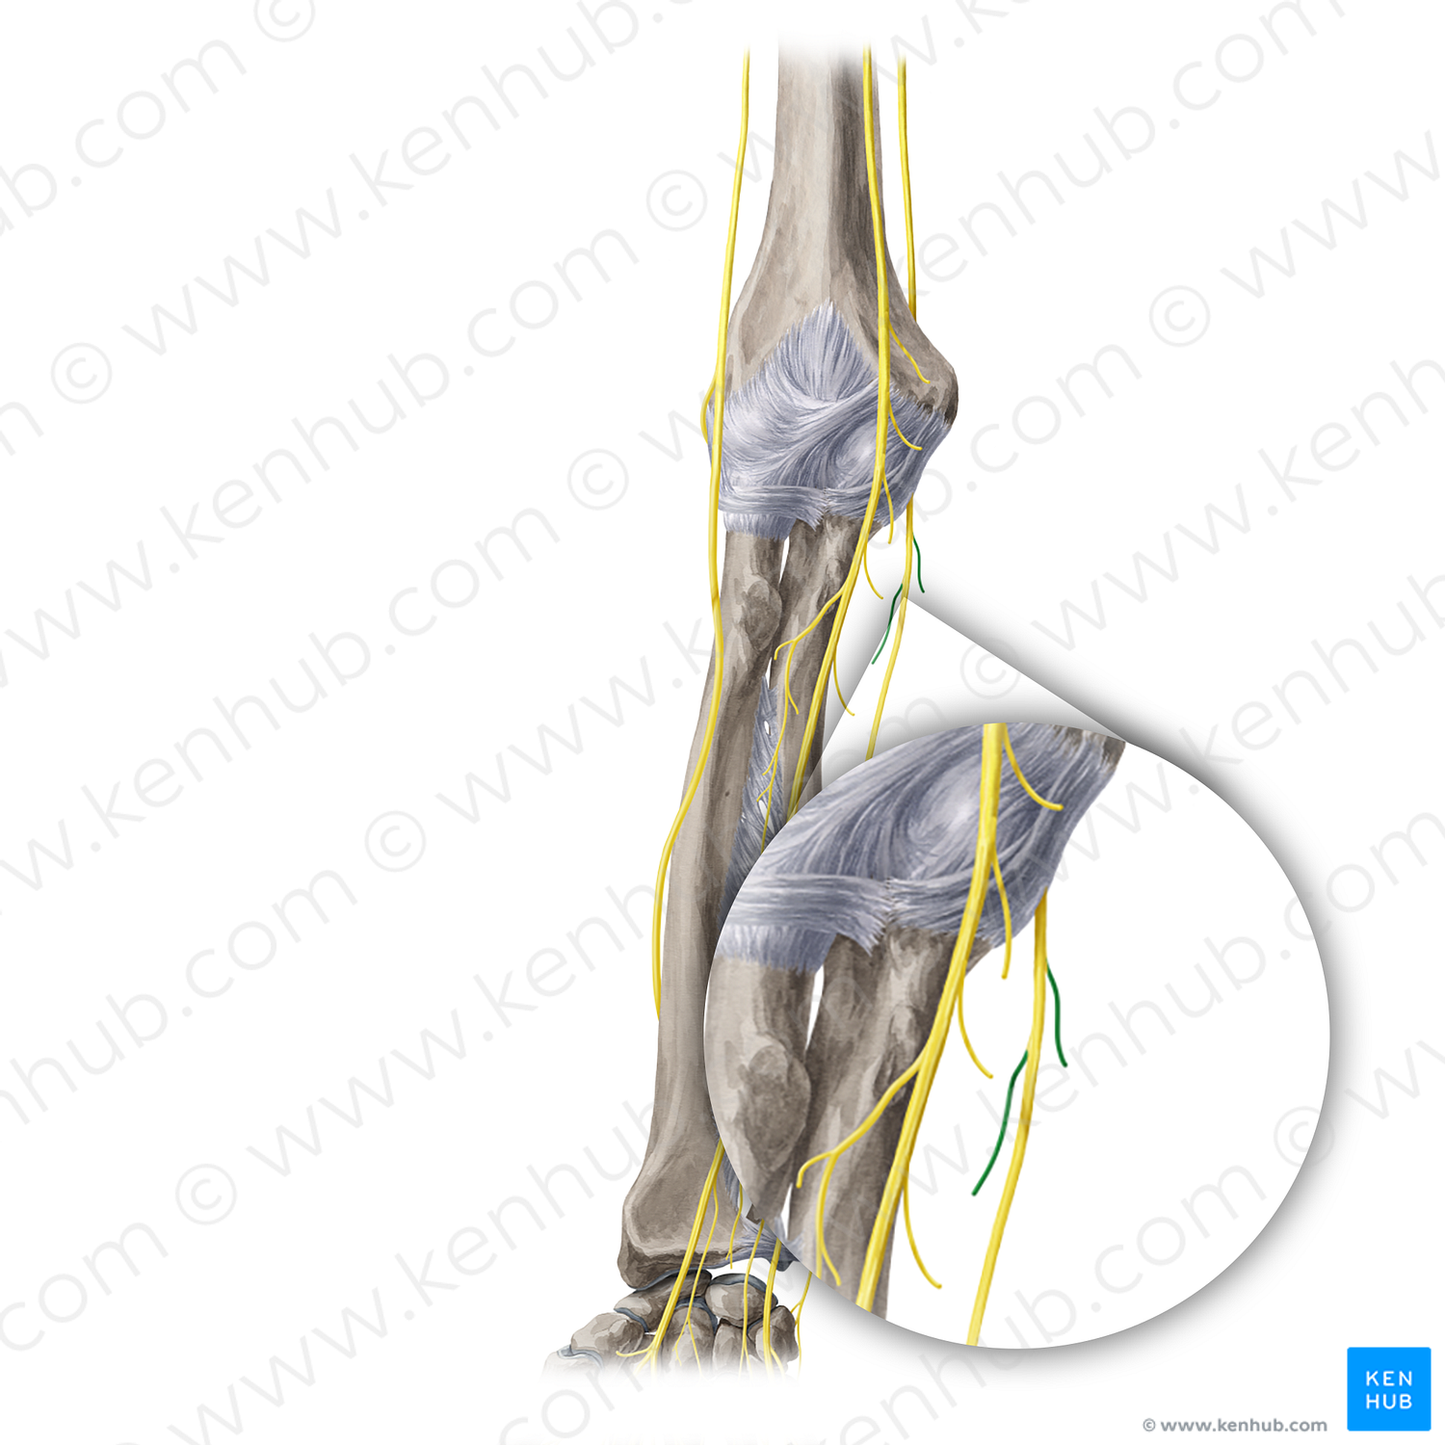 Muscular branches of ulnar nerve (#20401)